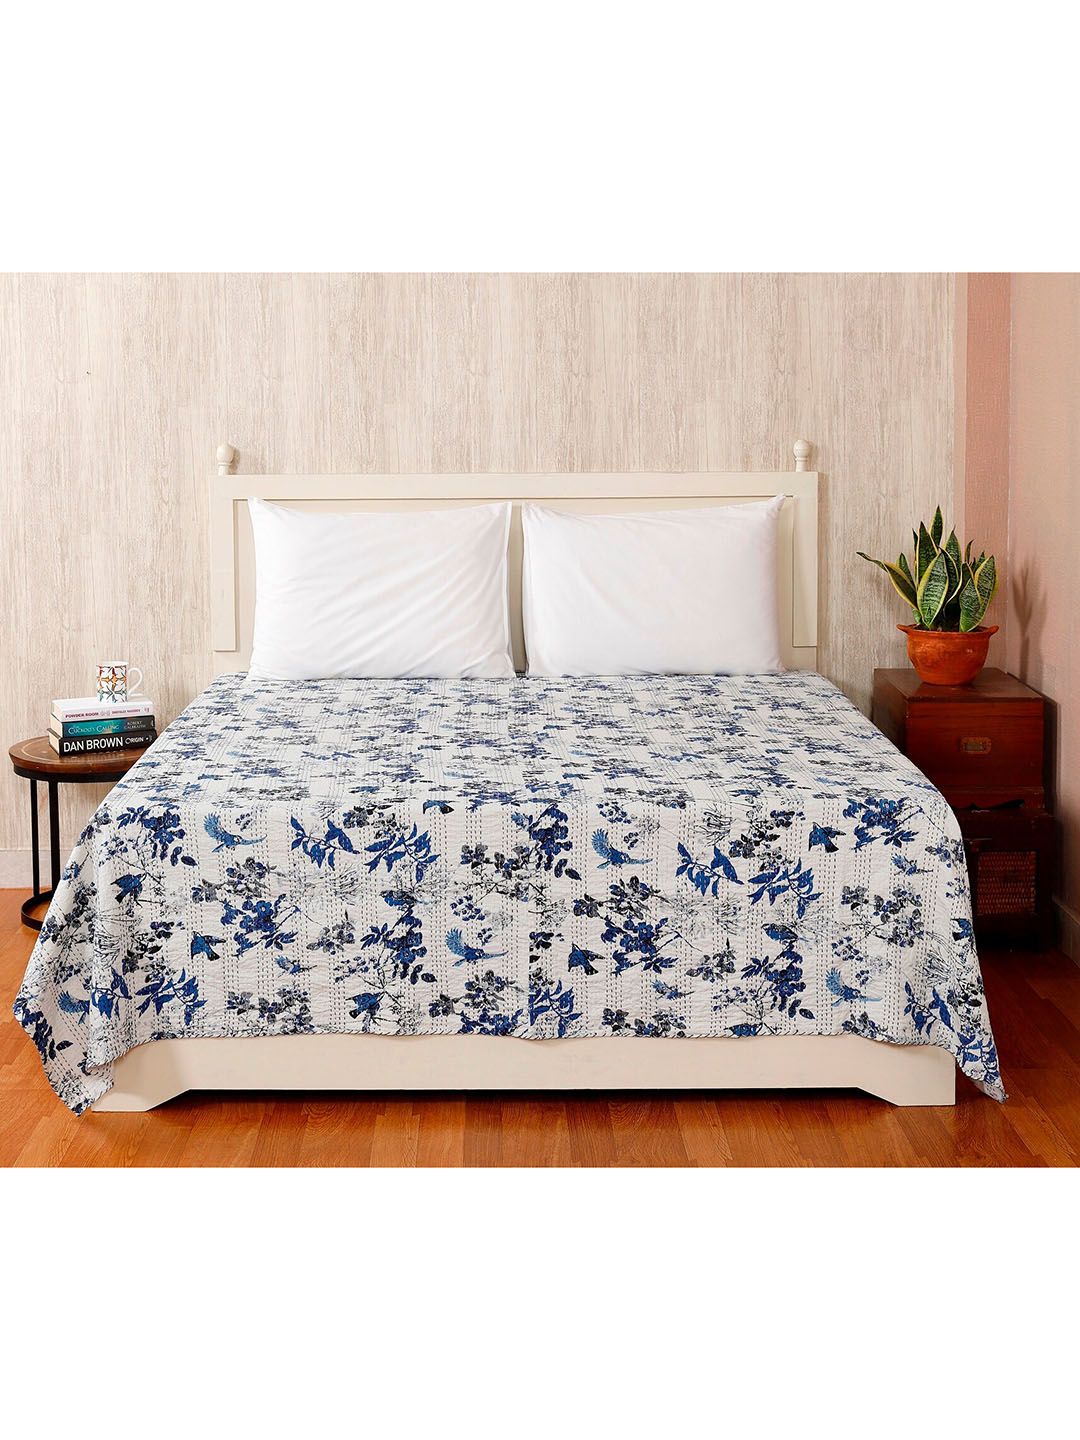 HANDICRAFT PALACE White & Blue Kantha Embroidered Cotton Double Queen Bed Cover Price in India